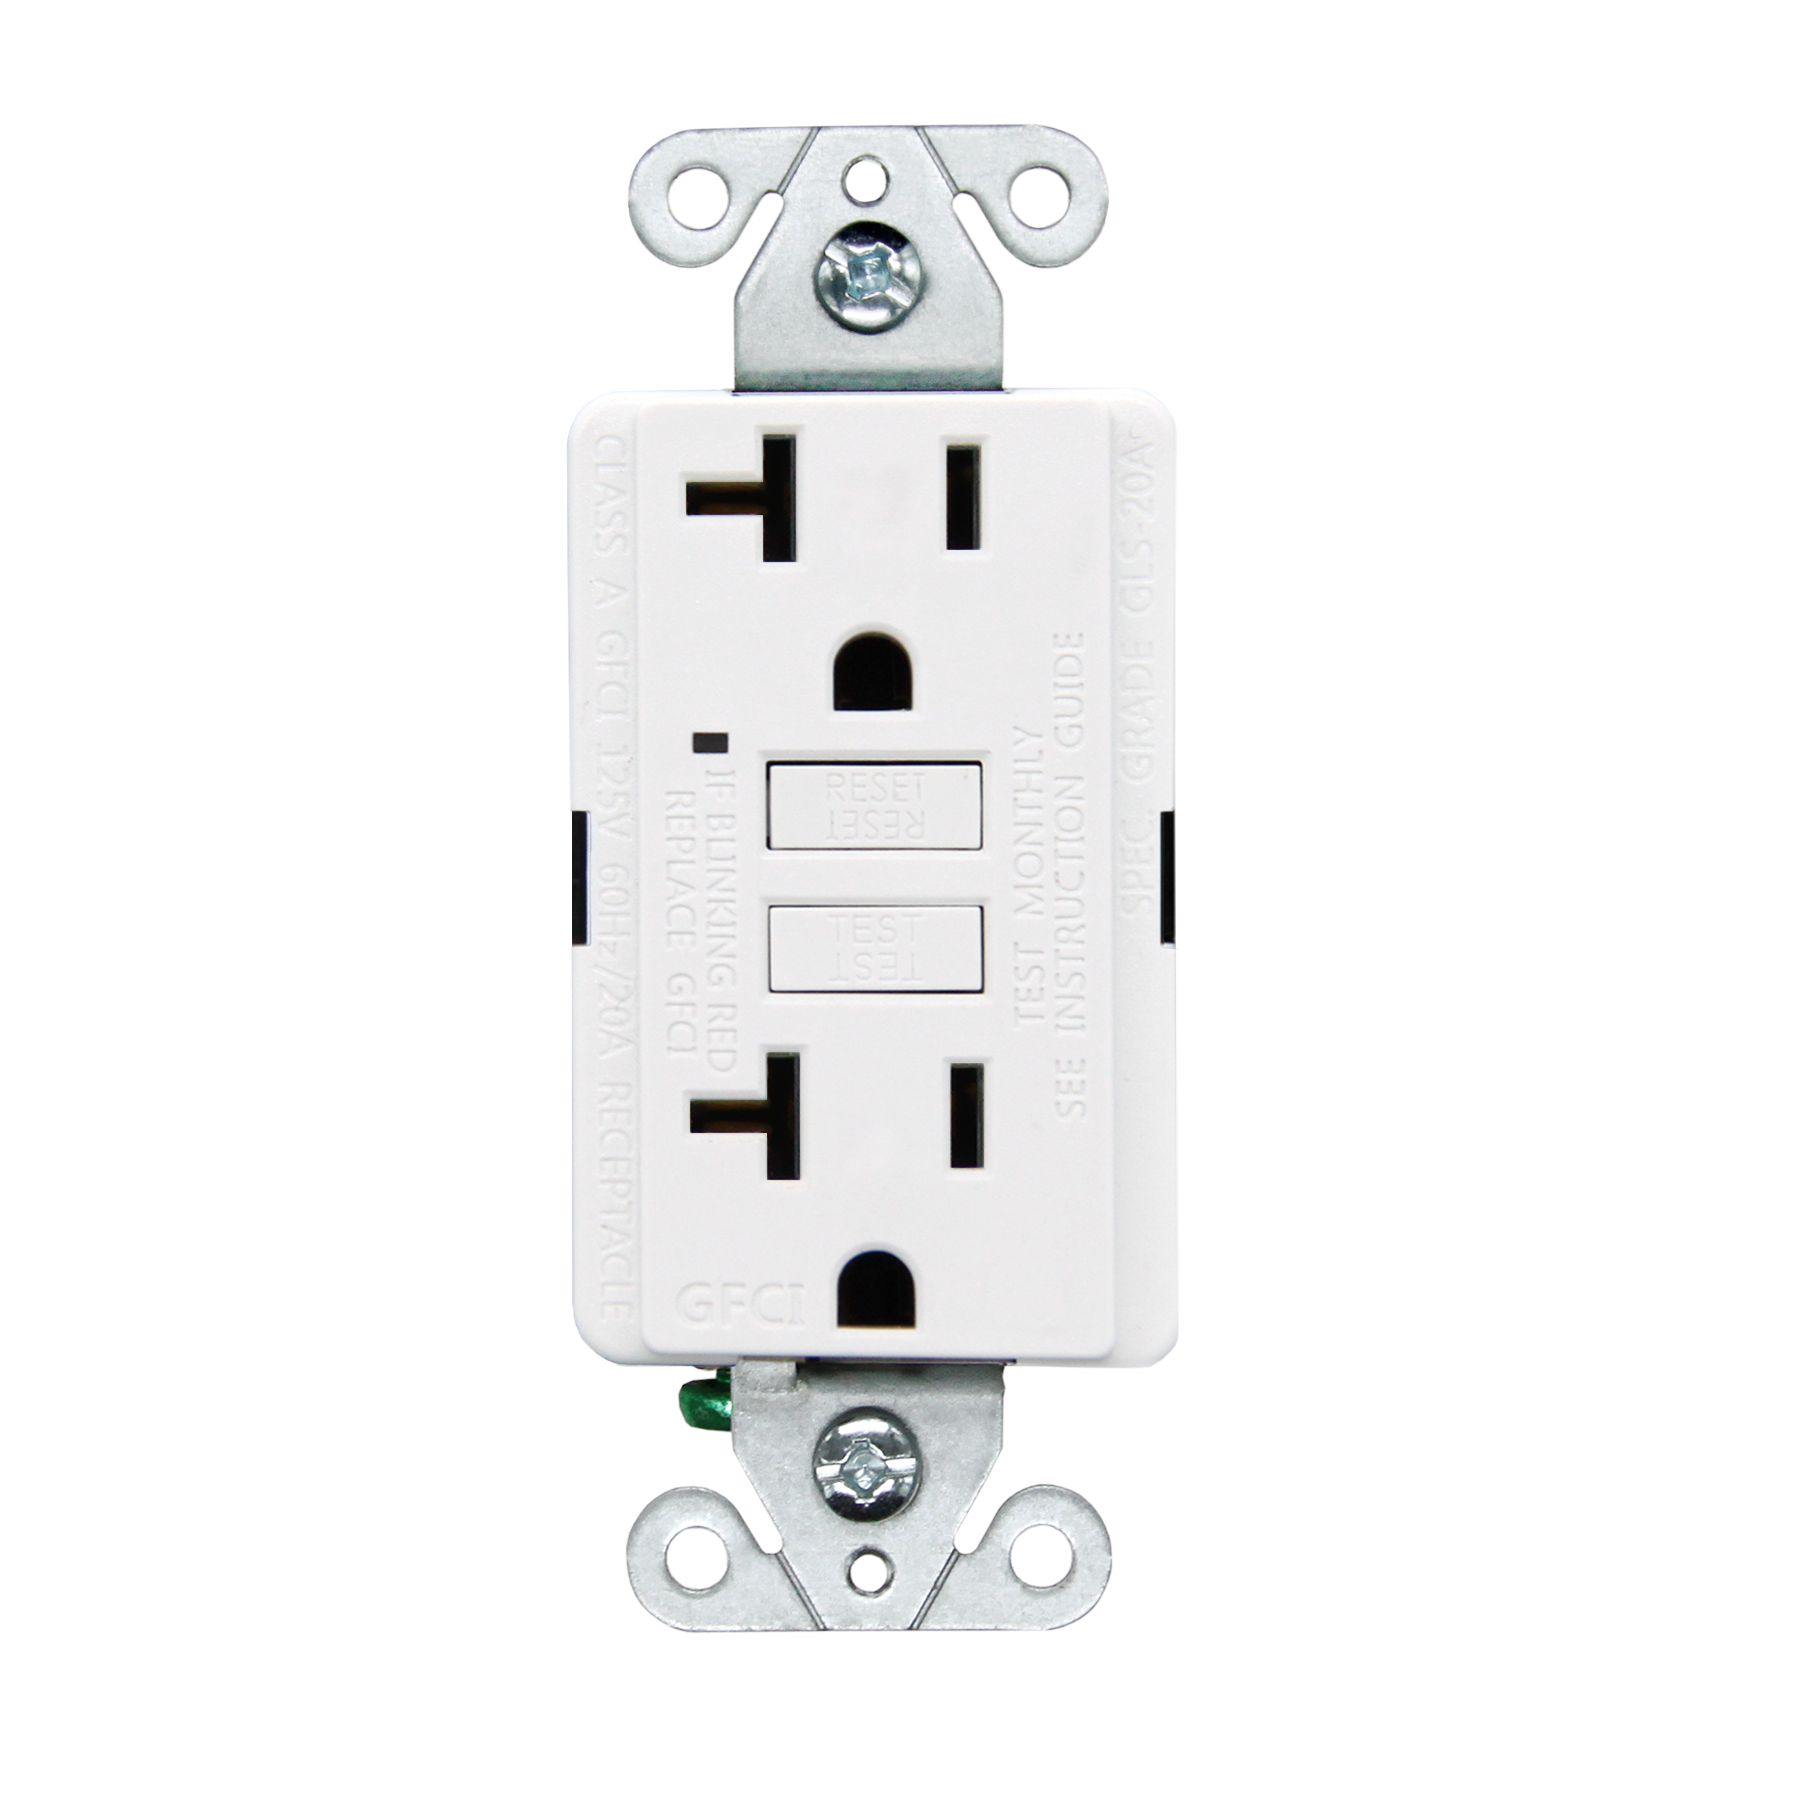 Faith UL Listed 20 Amp Self-Test GfCI Tamper Resistant Electrical GFCI Duplex Receptacle With Wall Plate Featured Image